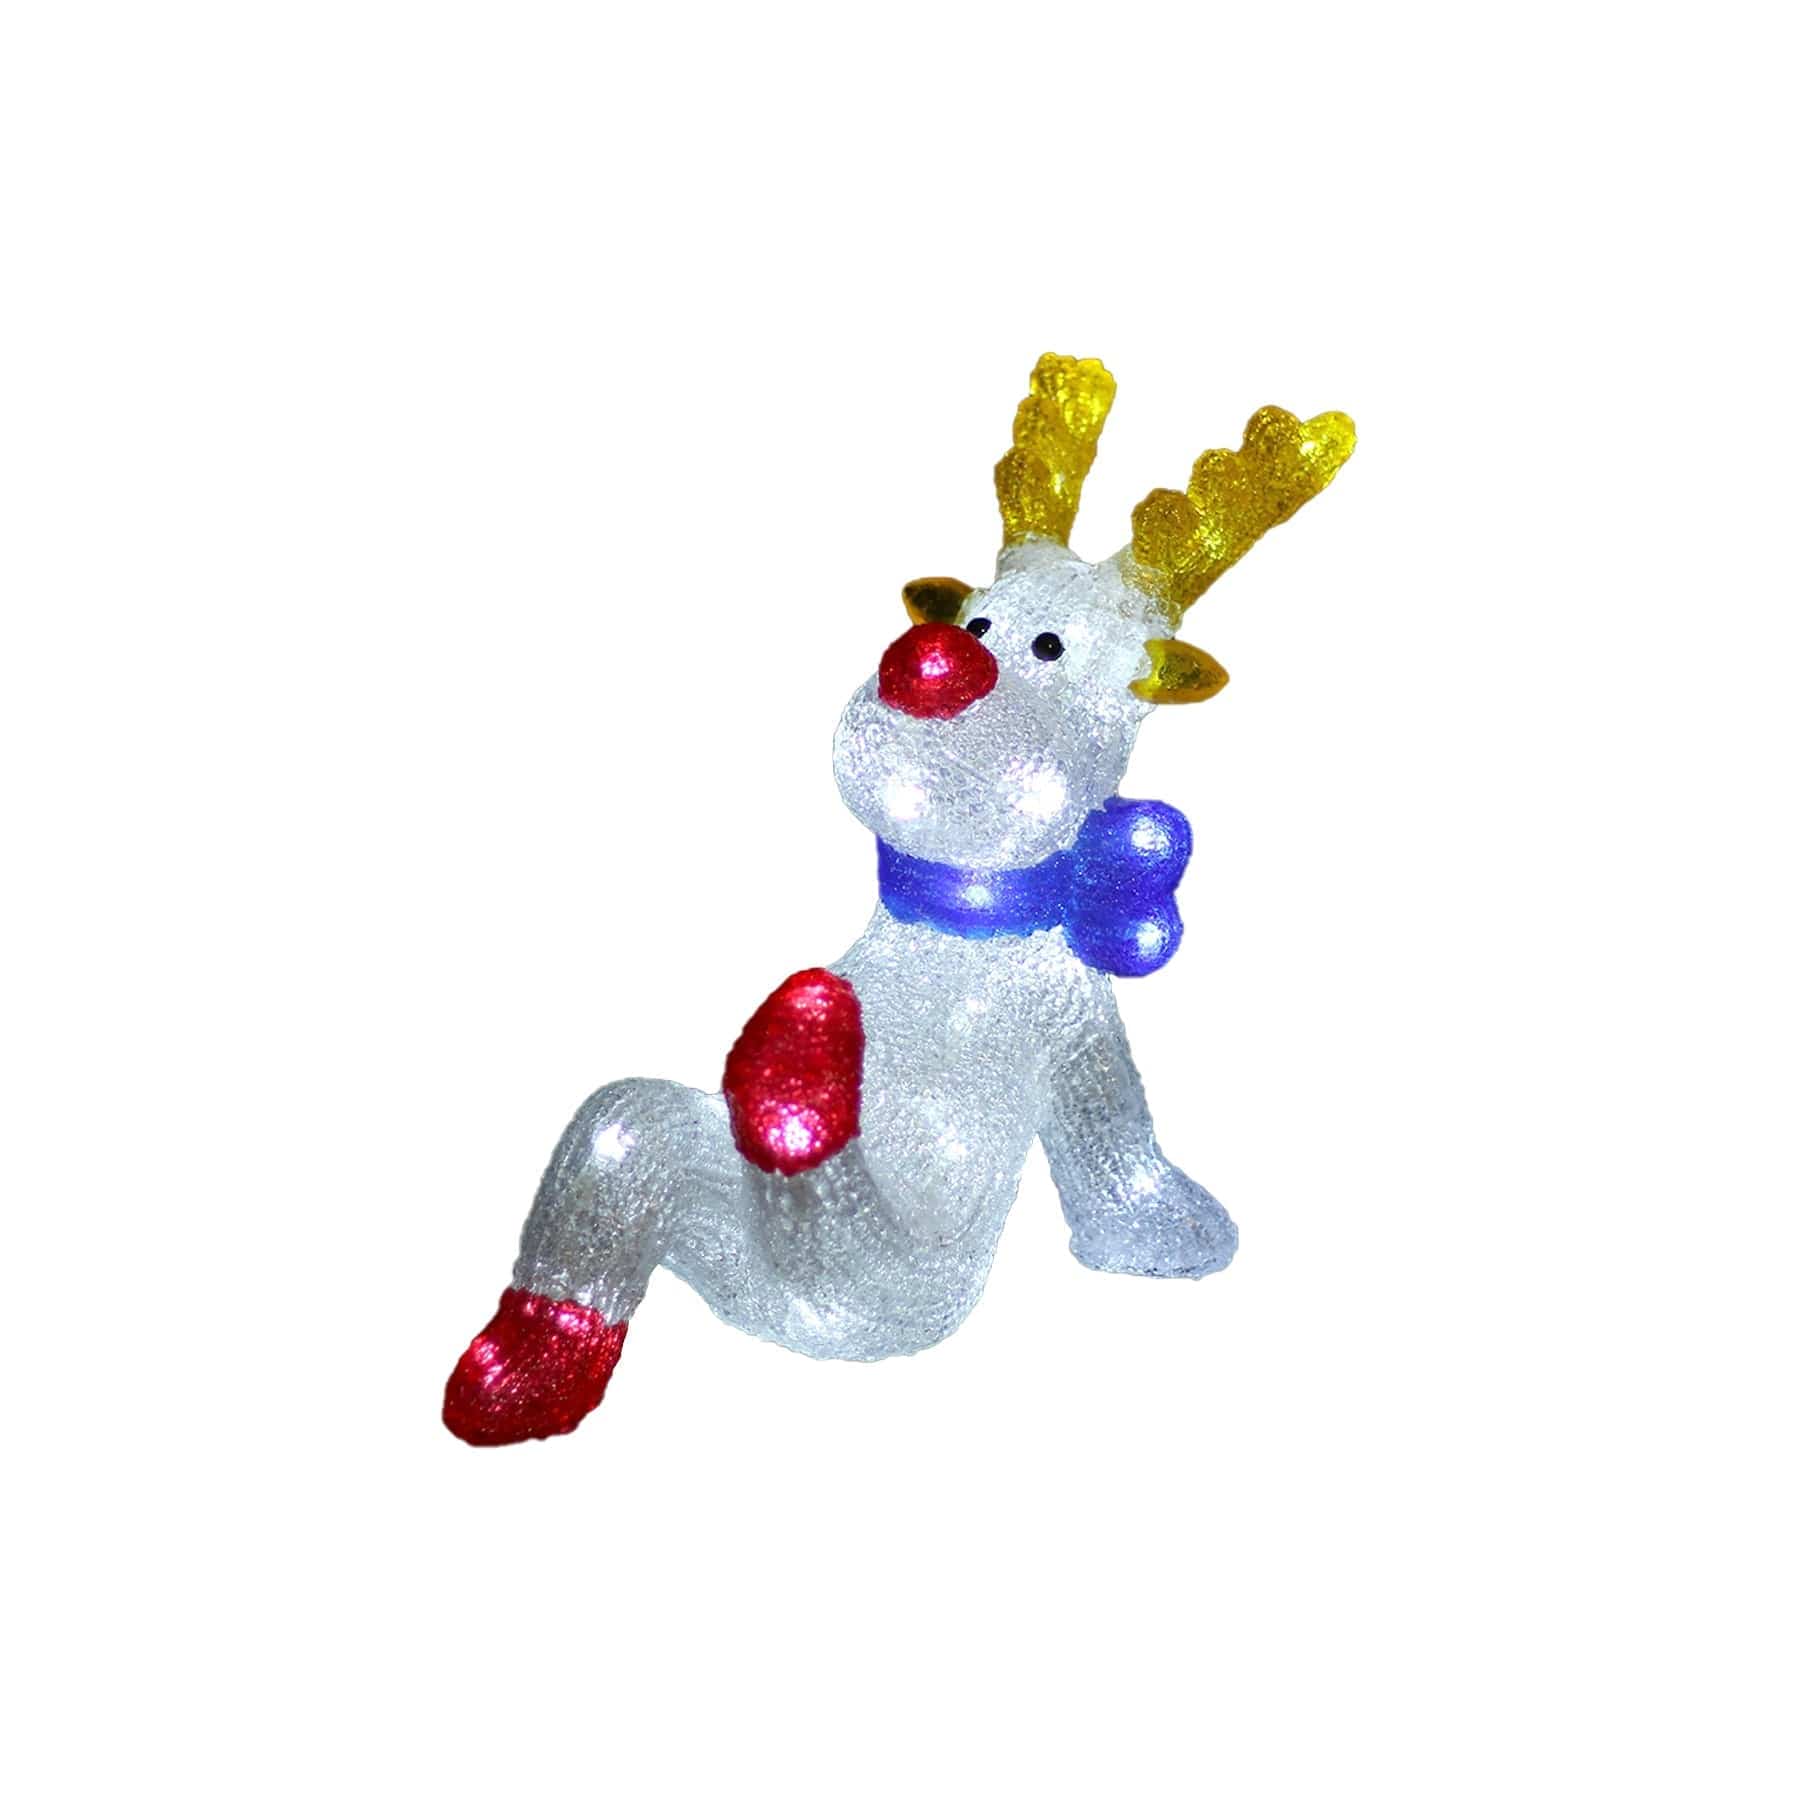 Promo Christmas Figure Acrylic Sitting Red Nose Reindeer - H27cm ACY018-P